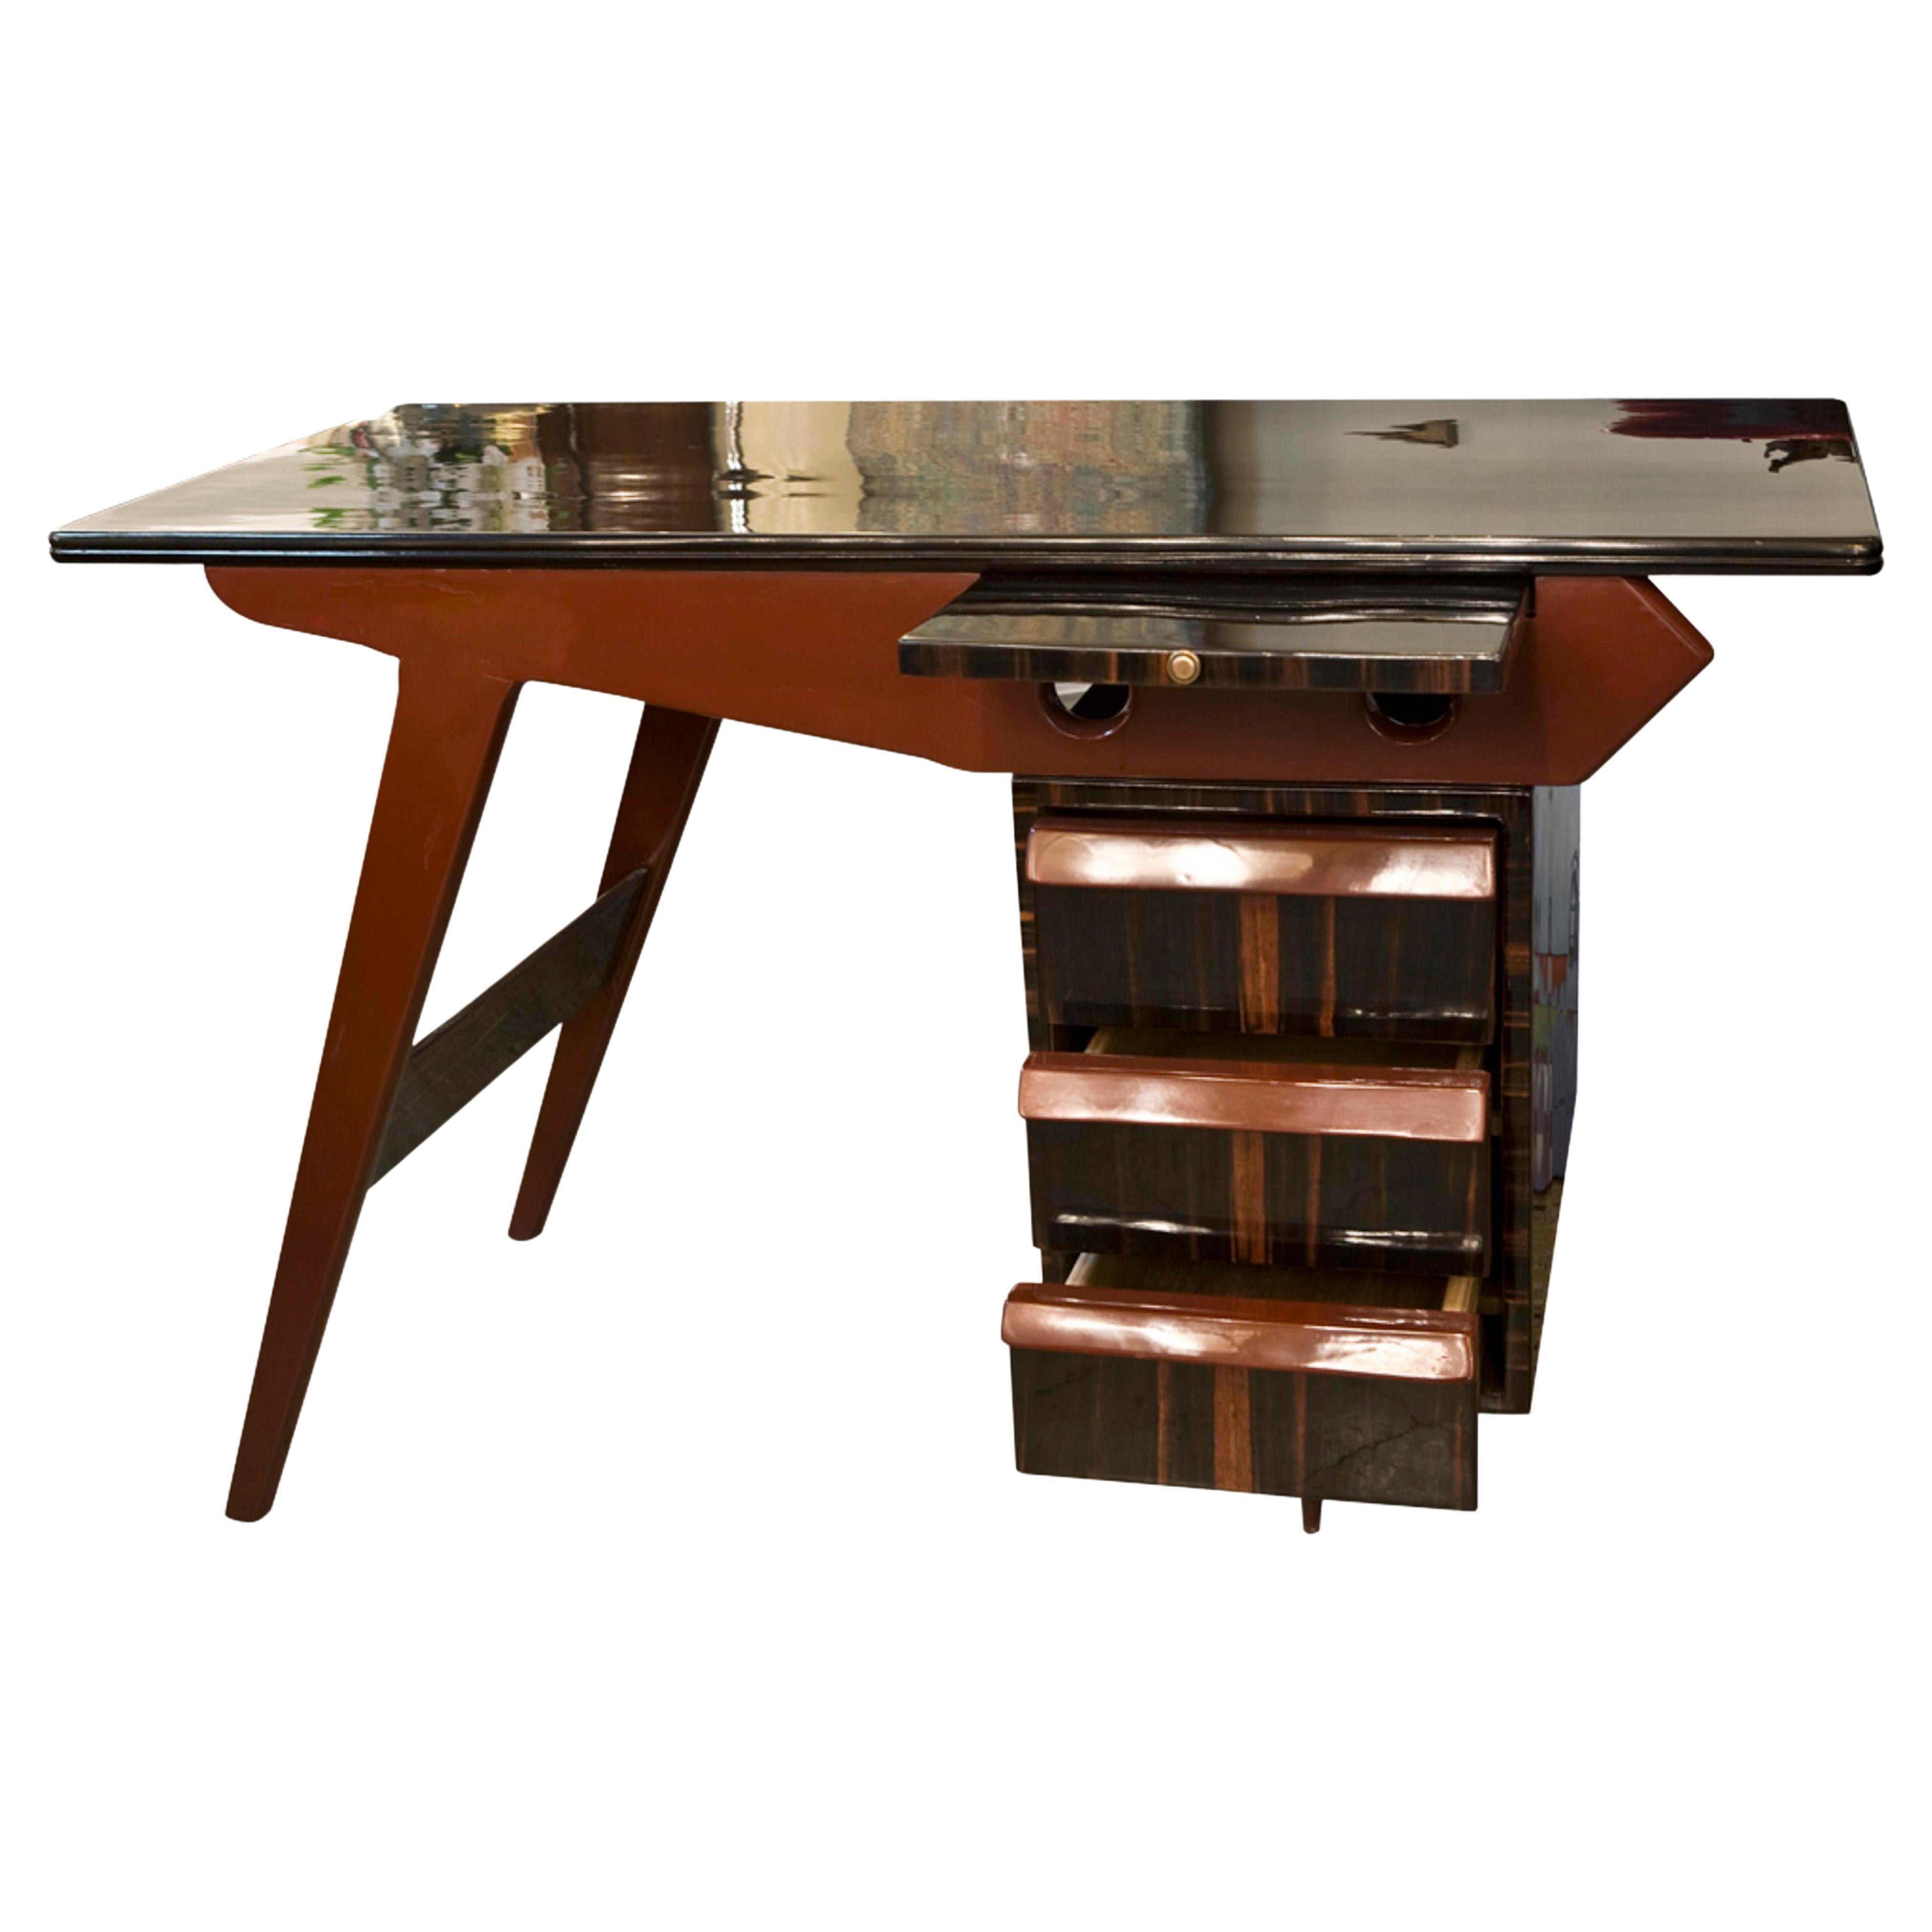 Italian Red Lacquered Wood Desk from the 50s